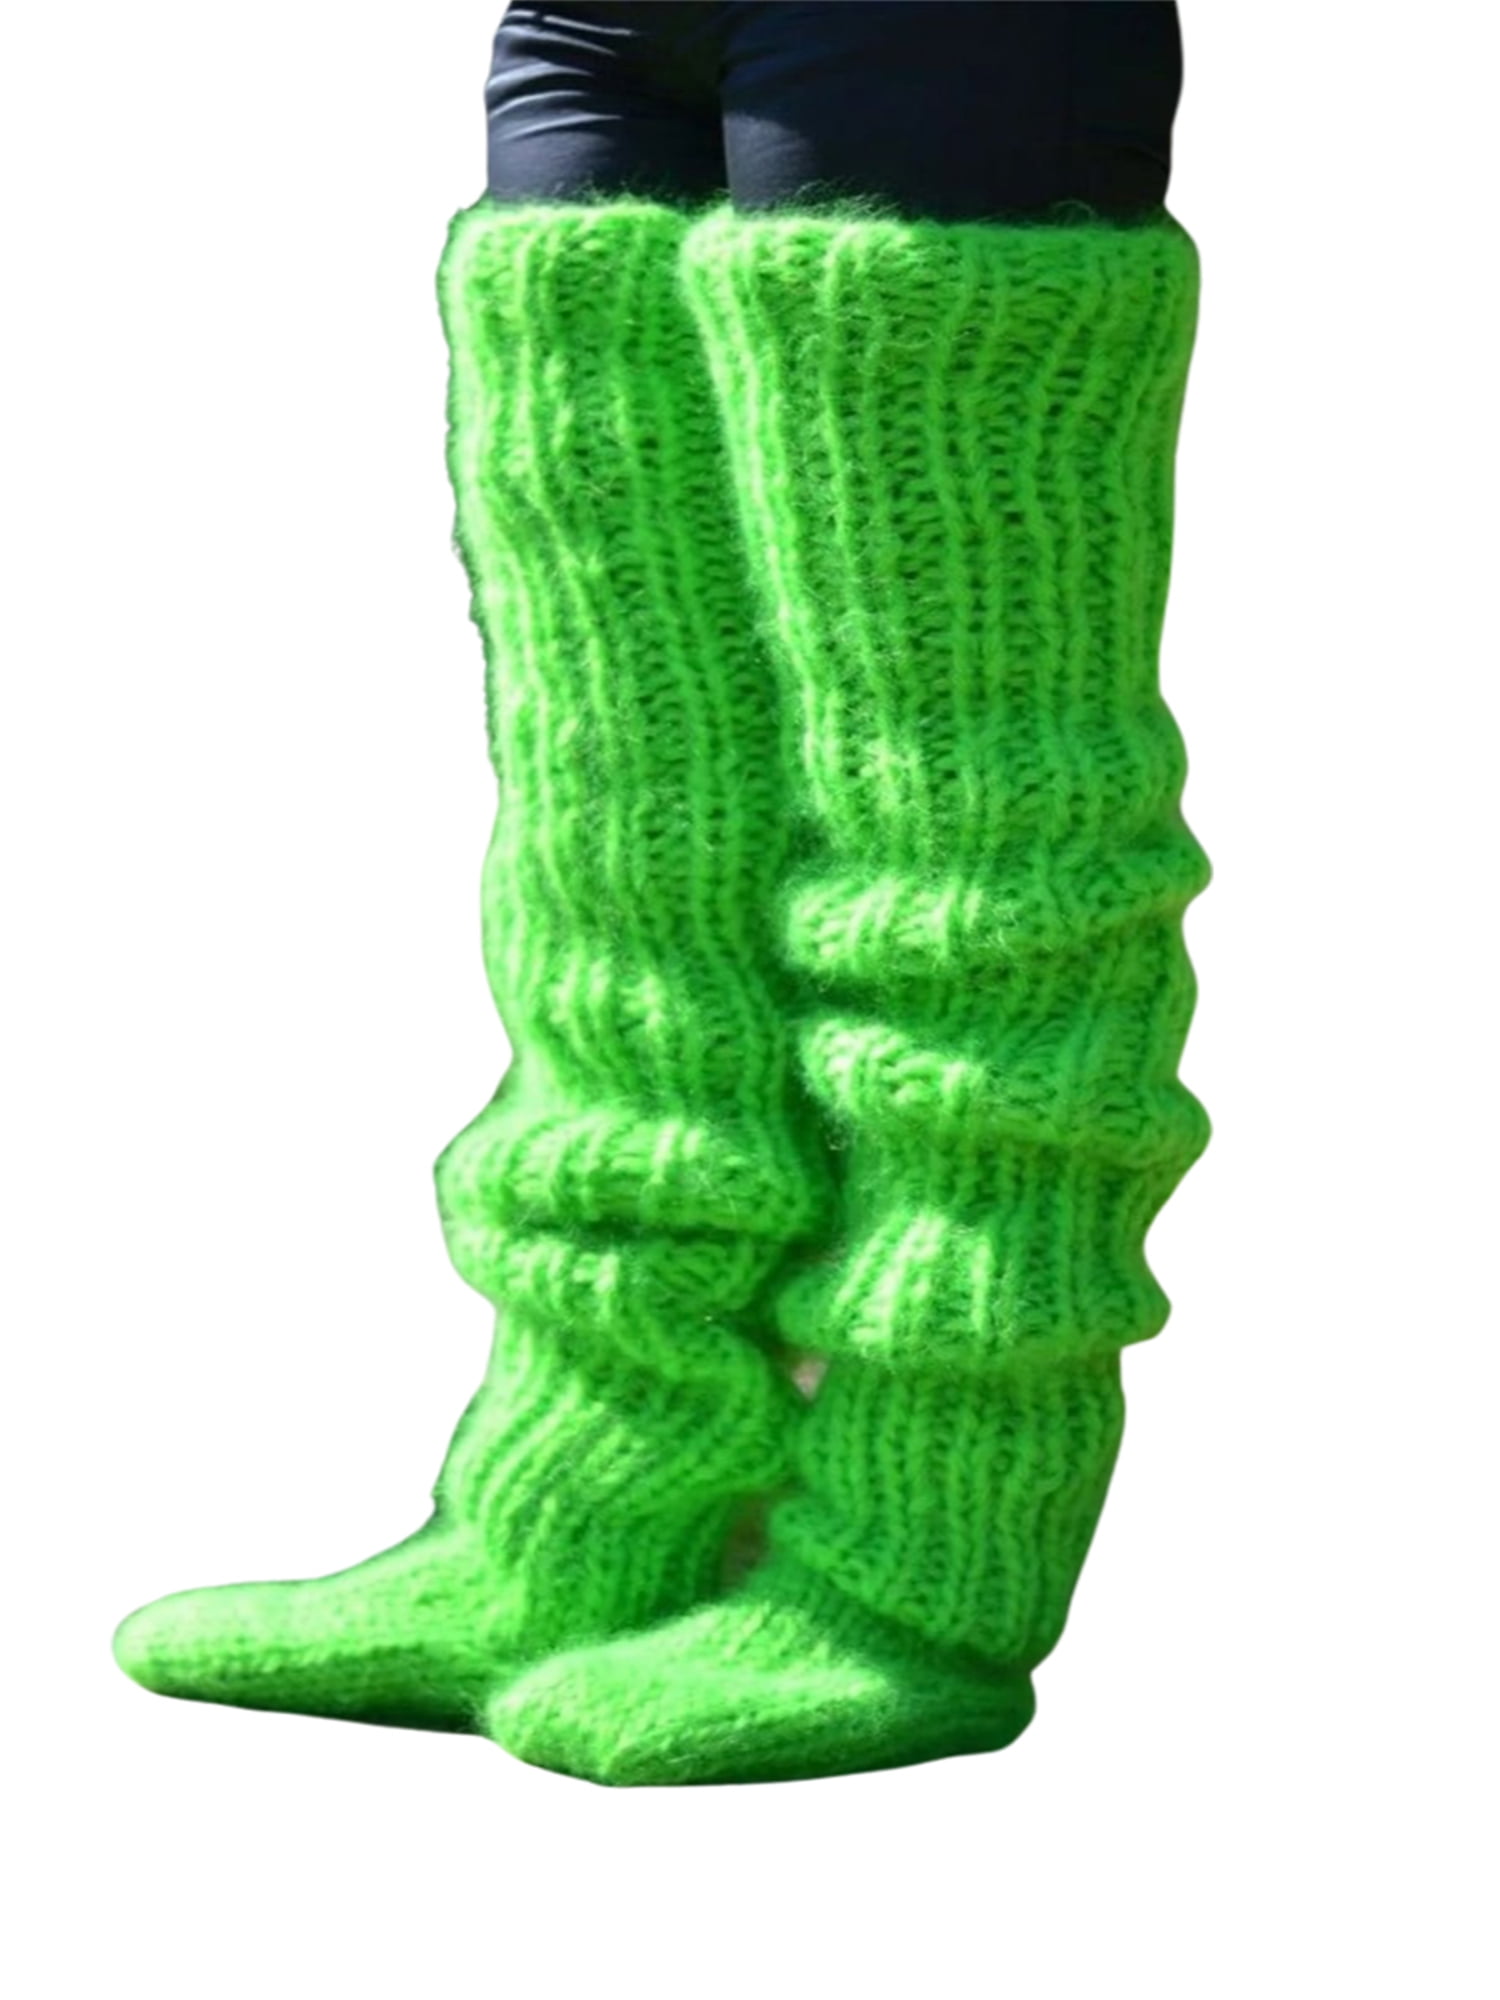 Thigh High Cable Knit Sweater Socks Women's Forest Green Over The Knee Boot Socks